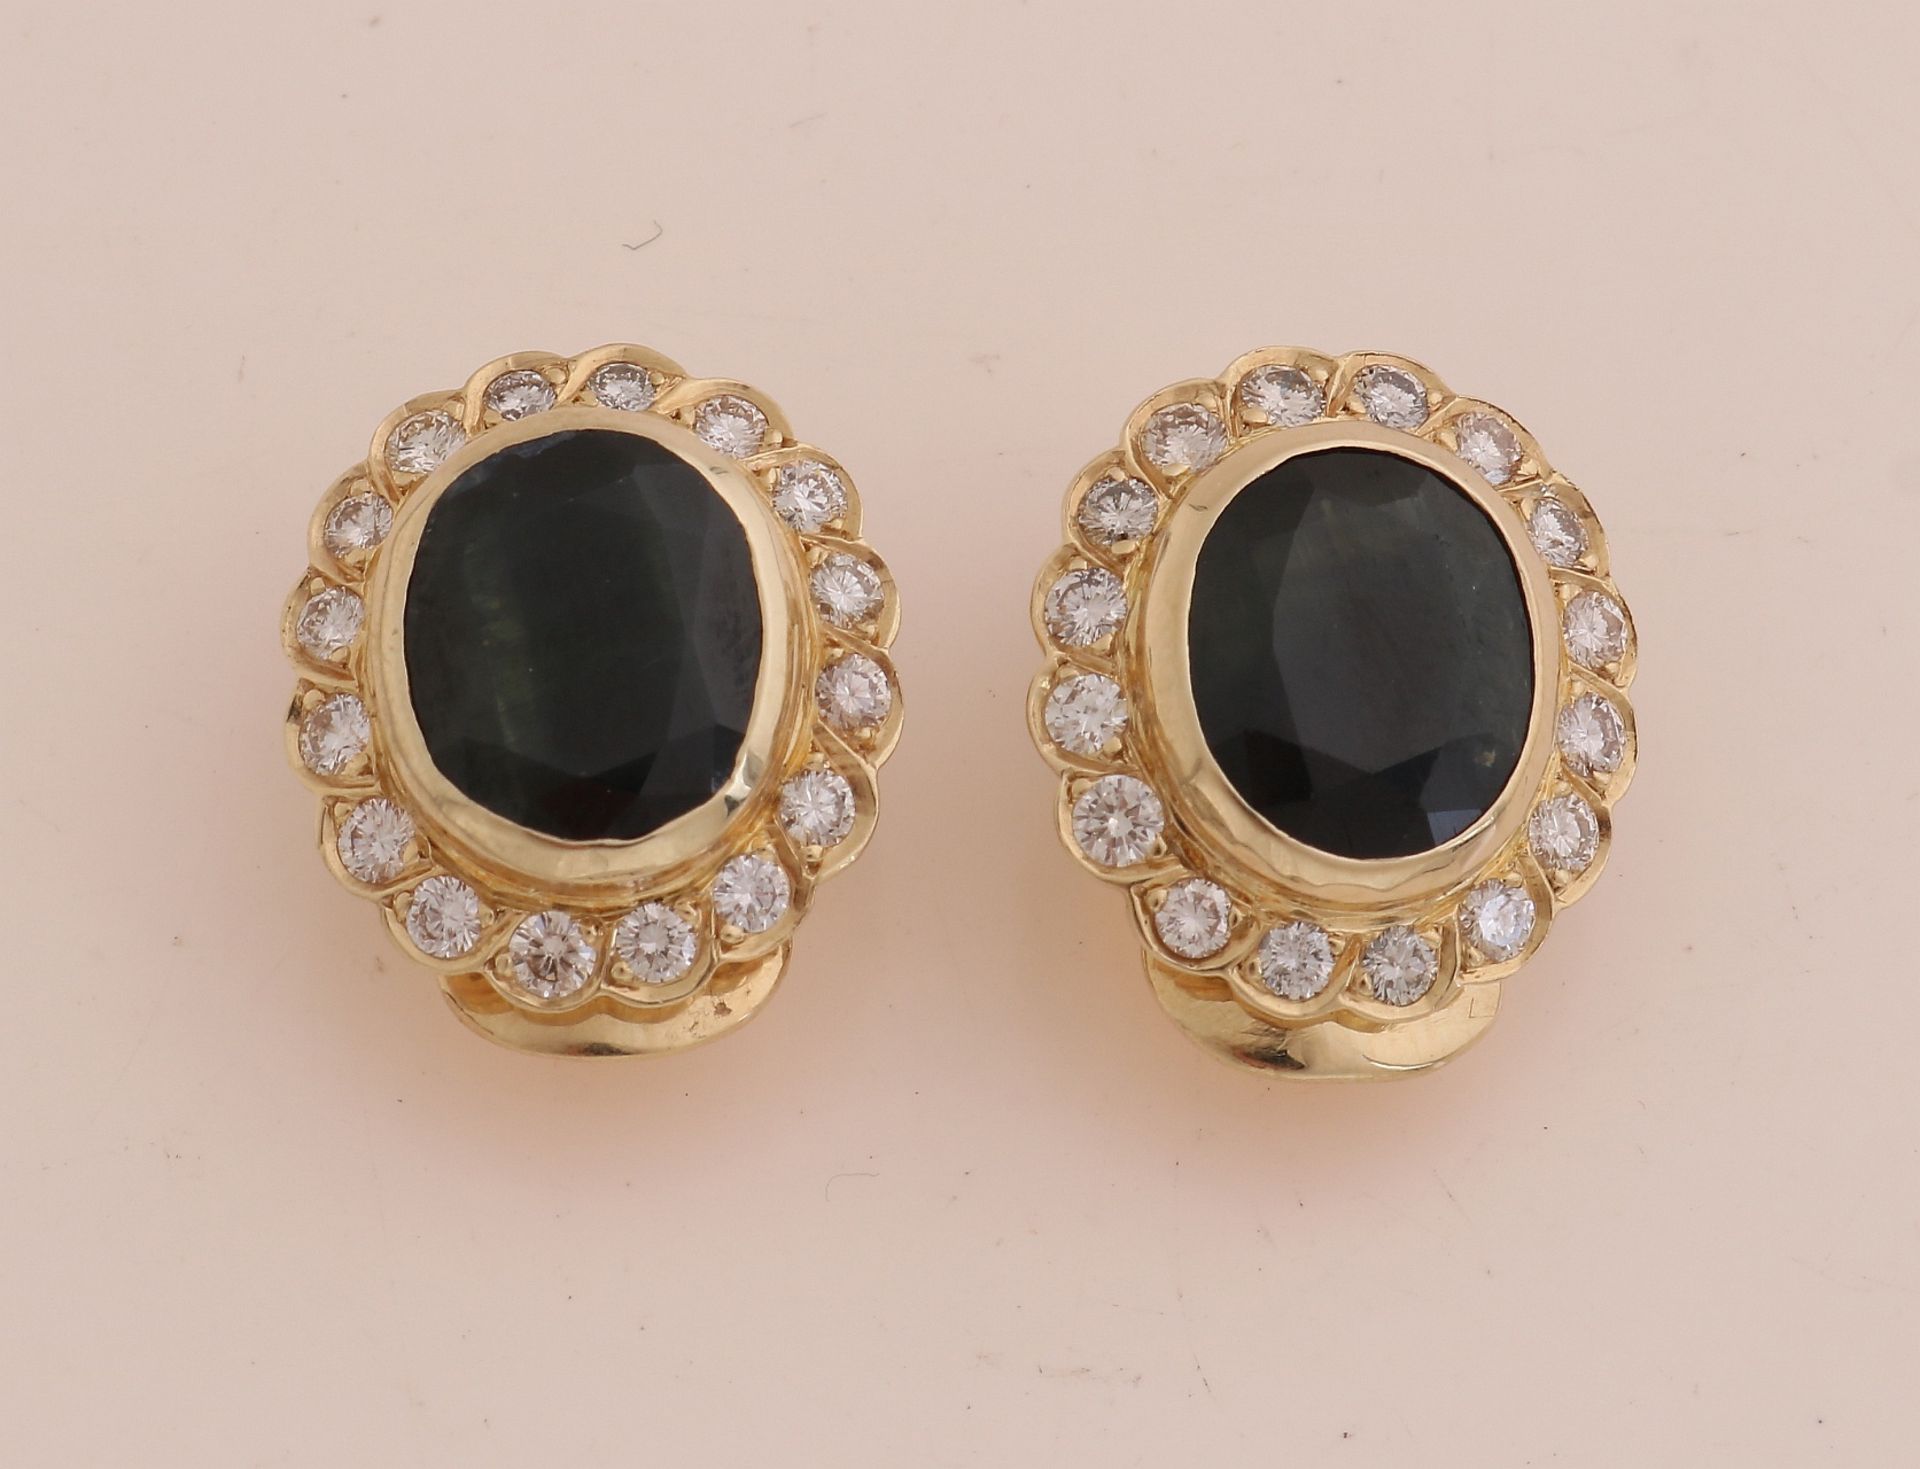 Gold ear studs with sapphire and diamond